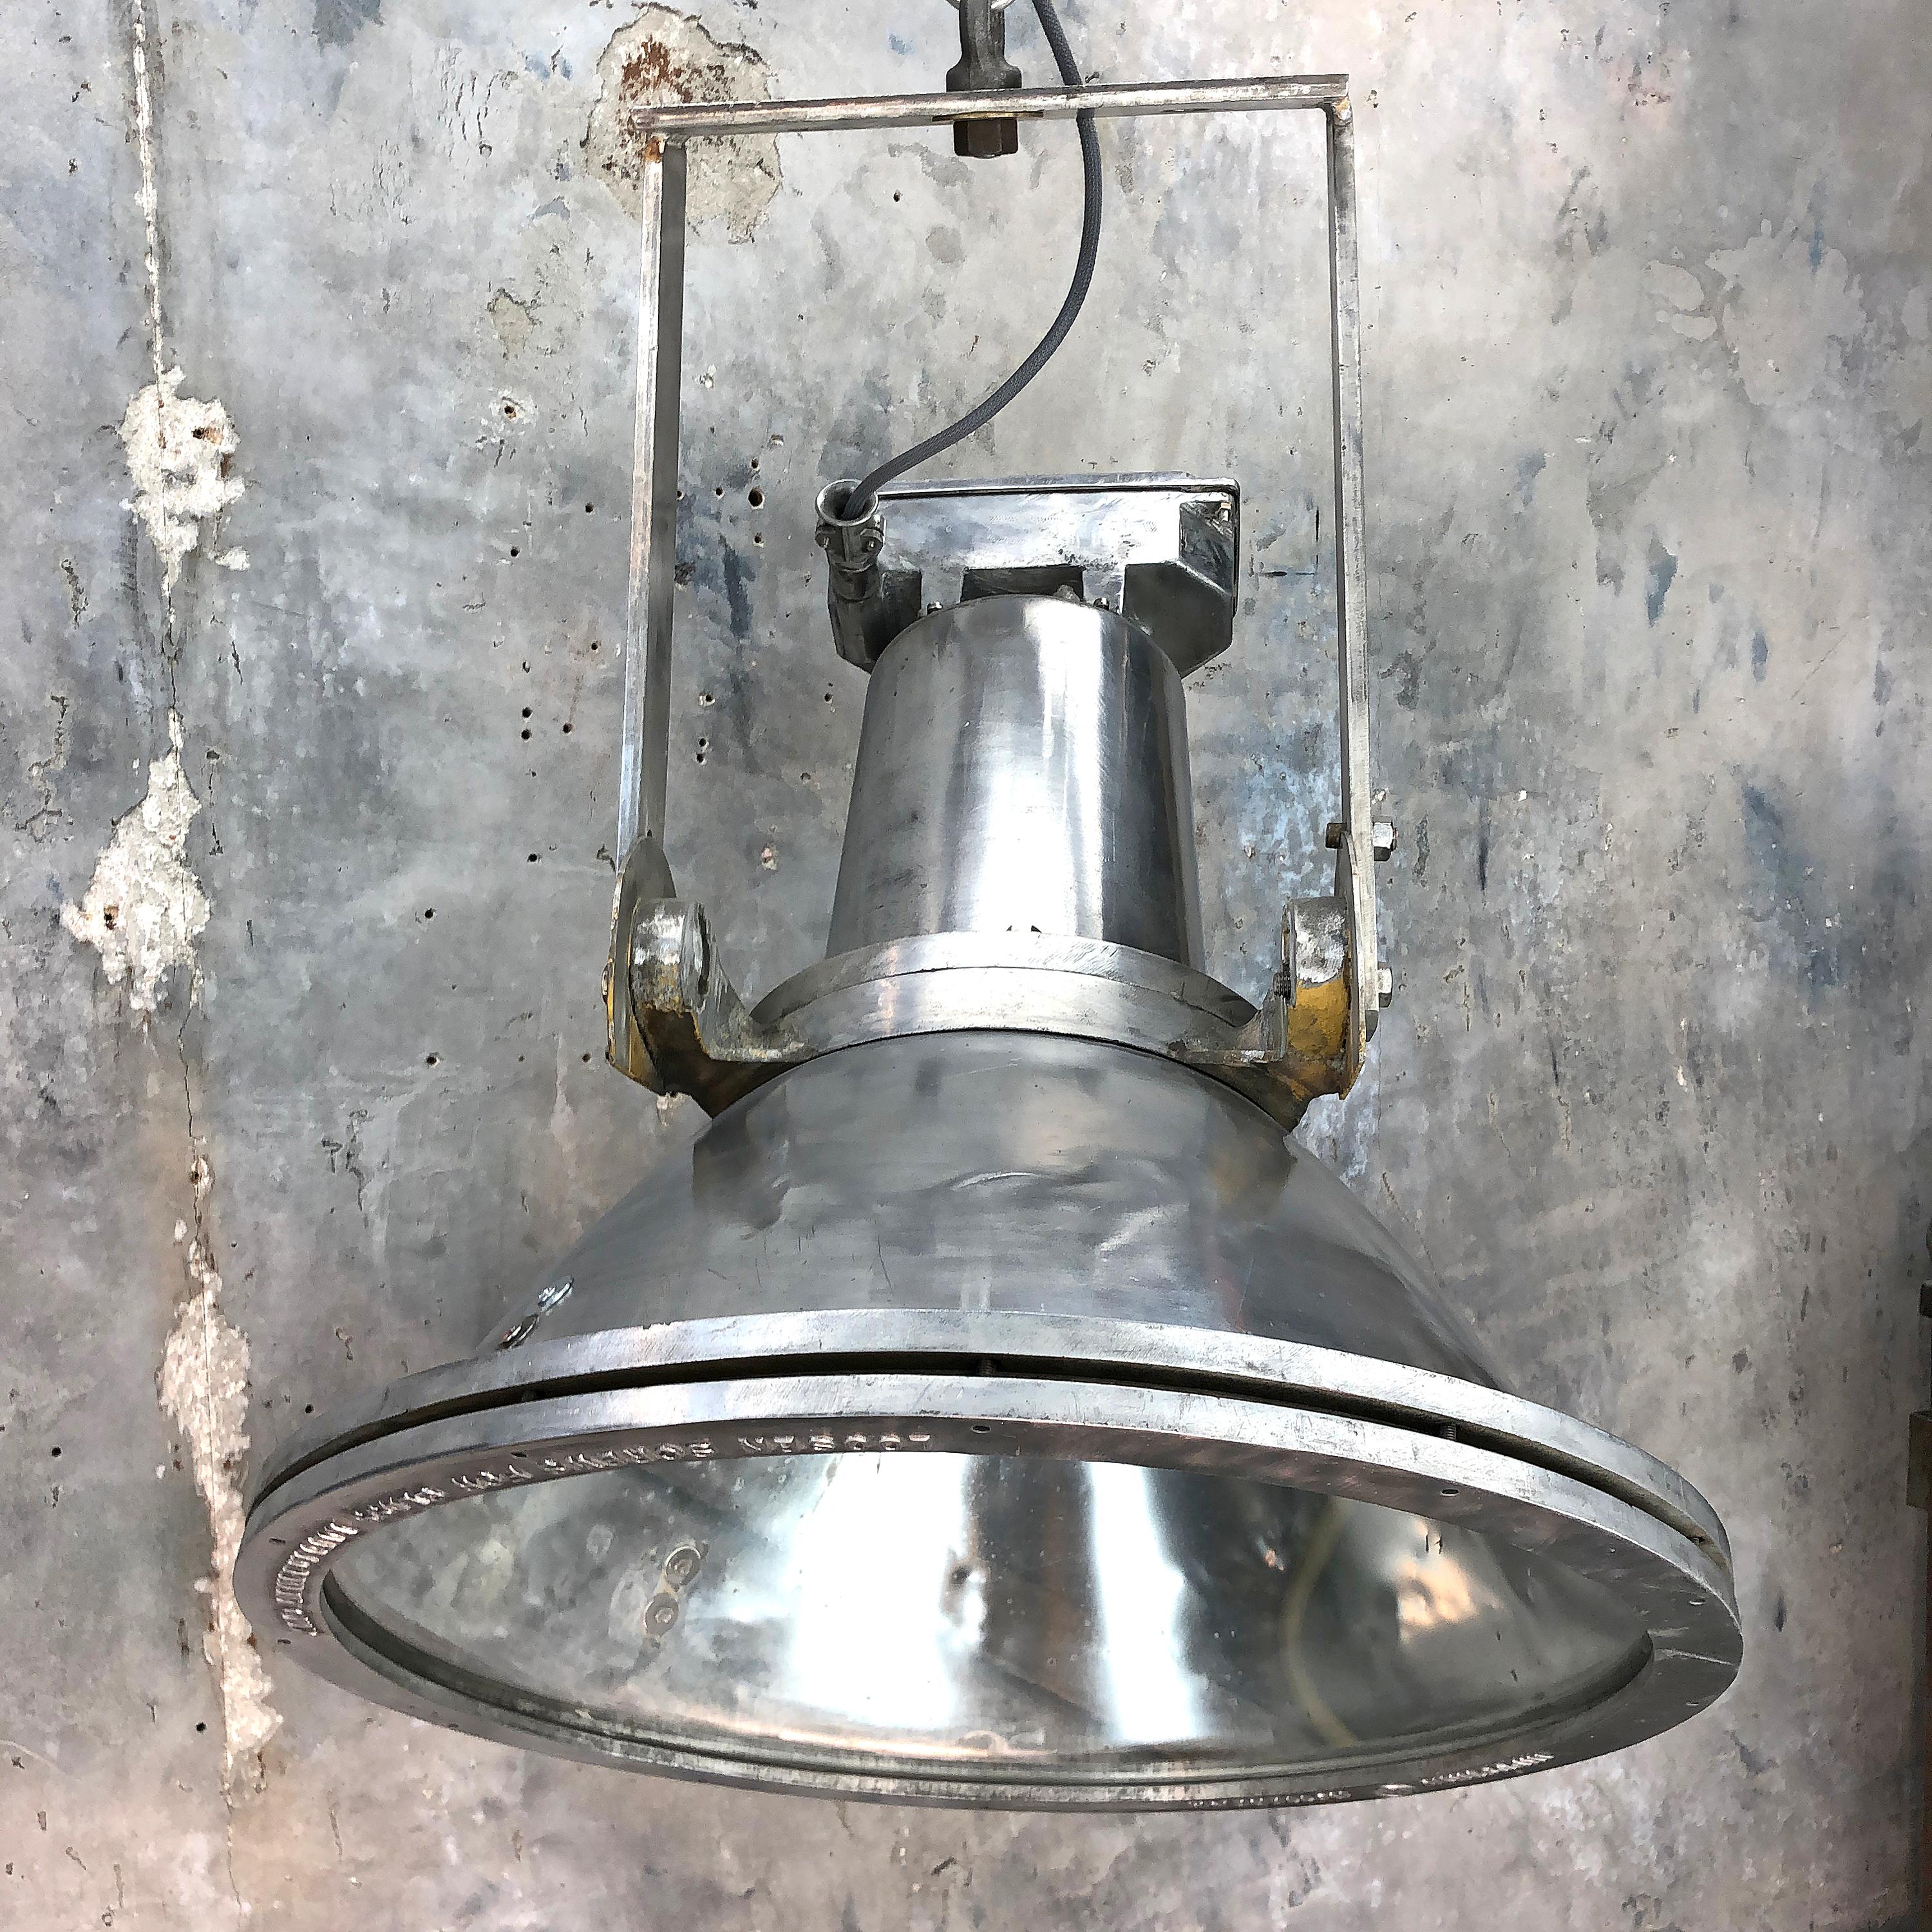 A reclaimed retro industrial flood lamp by Industria Rotterdam.  Professionally restored and re-wired, in prefect working condition ready for installation into modern interiors.

Originally these lights would have been used to illuminate ports and